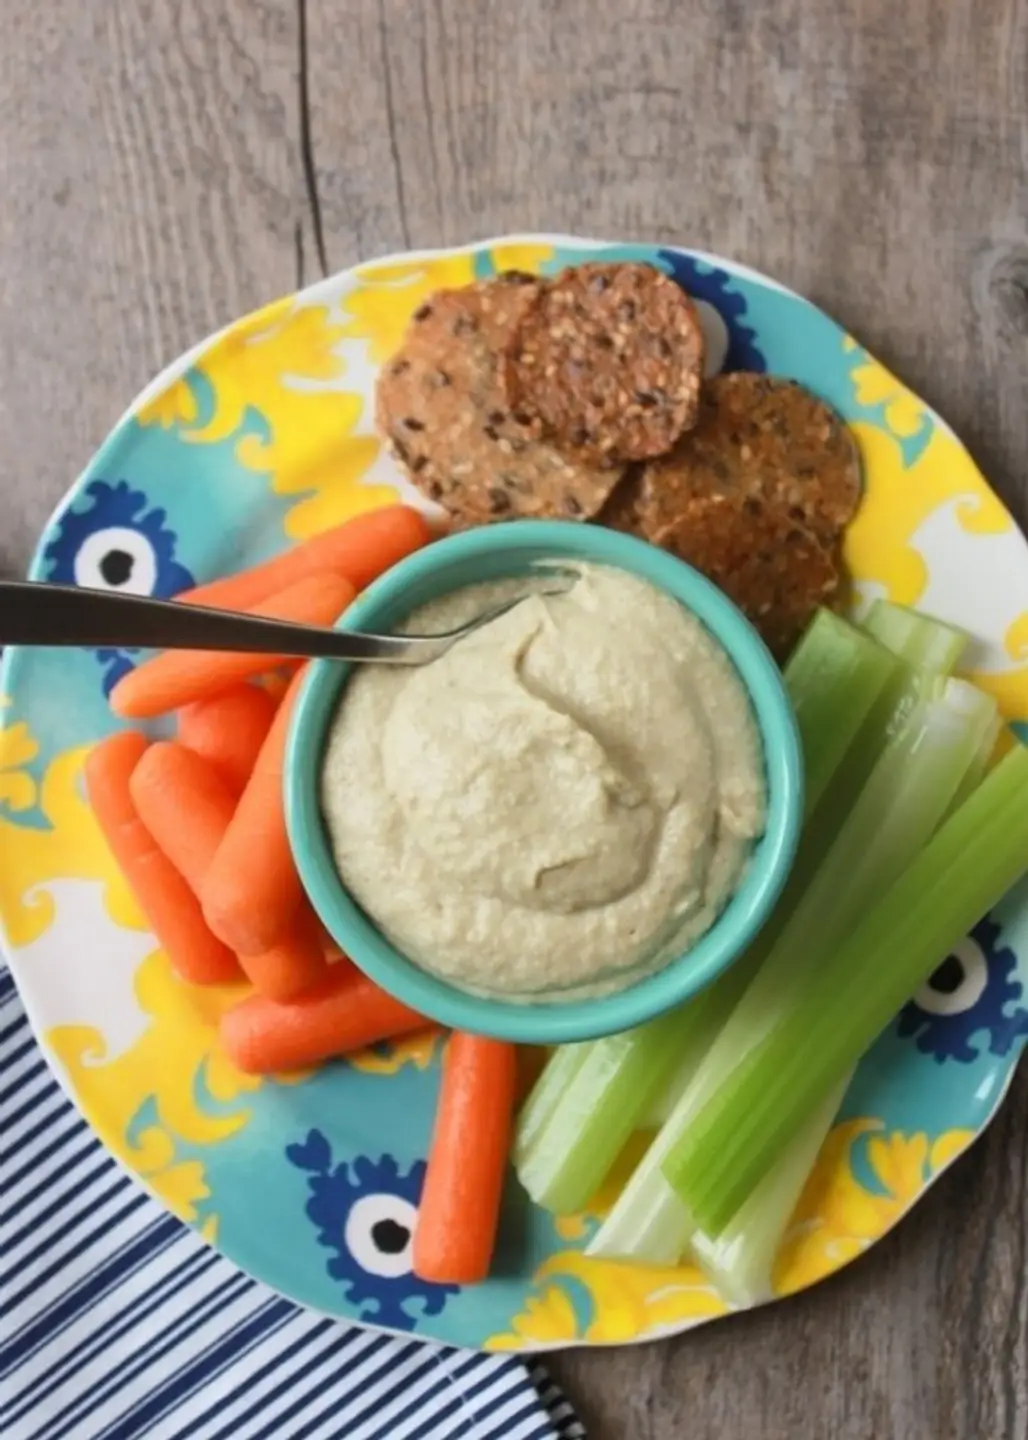 Skip Powdered Dip Mixes and Flavor It Yourself